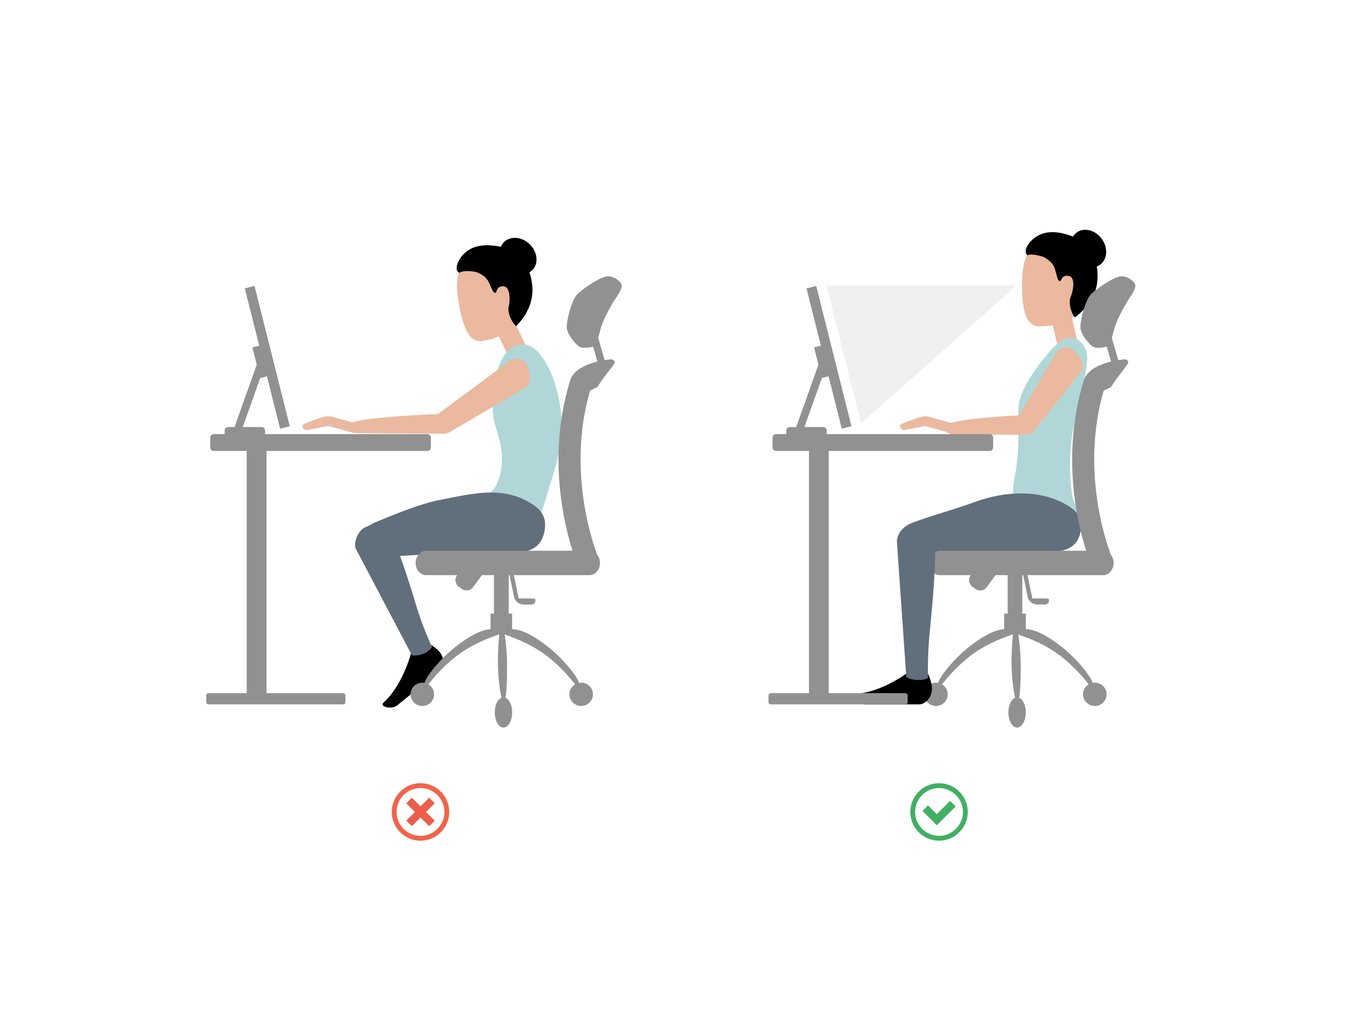 Diagram showing how to sit correctly at a desk